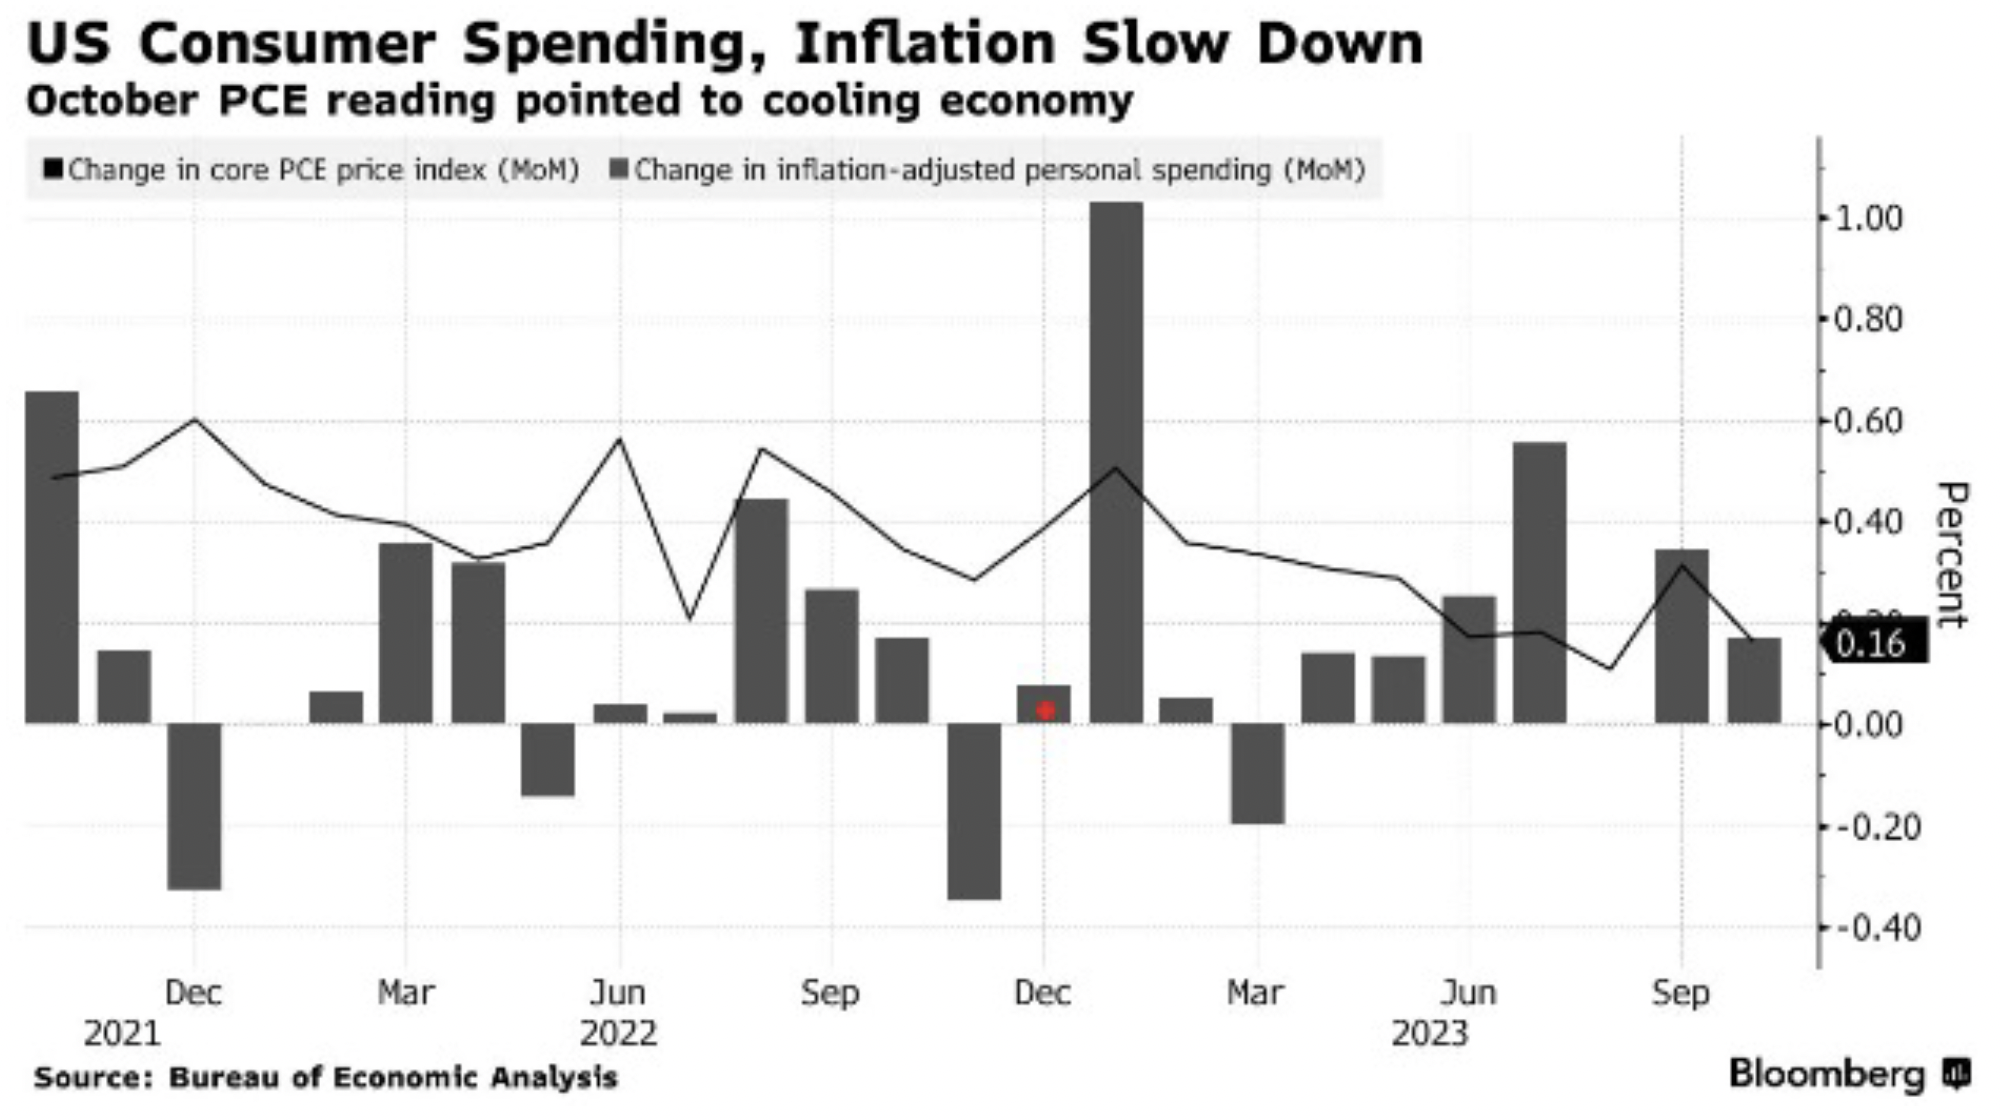 US Consumer Spending, Inflation Slowdown october pce reading pointed to cooling economy - from Bureau of Economic Analysis